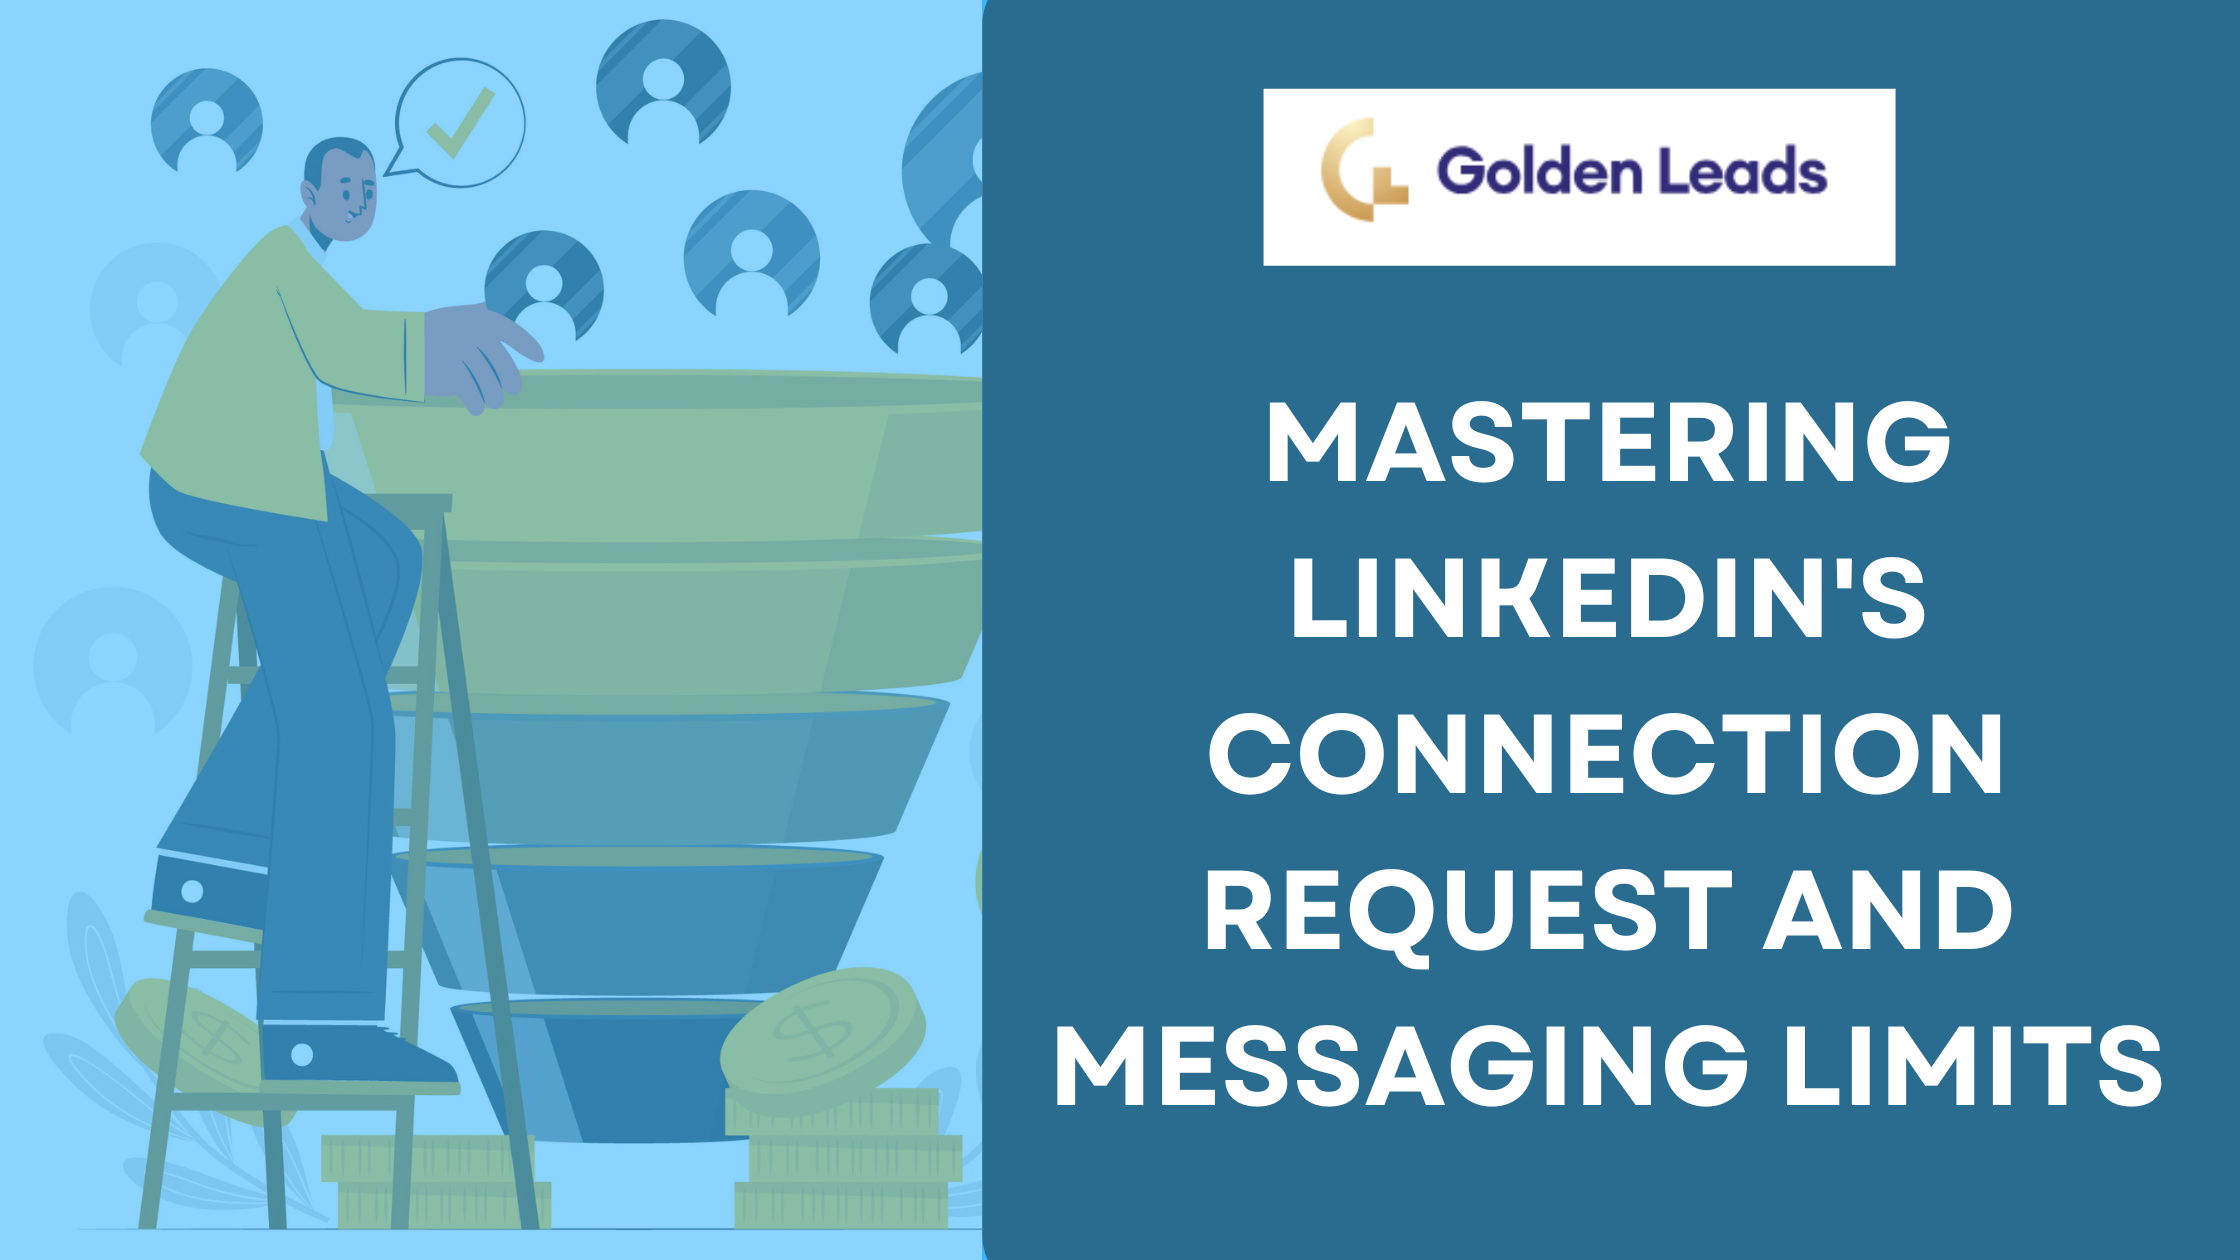 Mastering LinkedIn's Connection Request and Messaging Limits